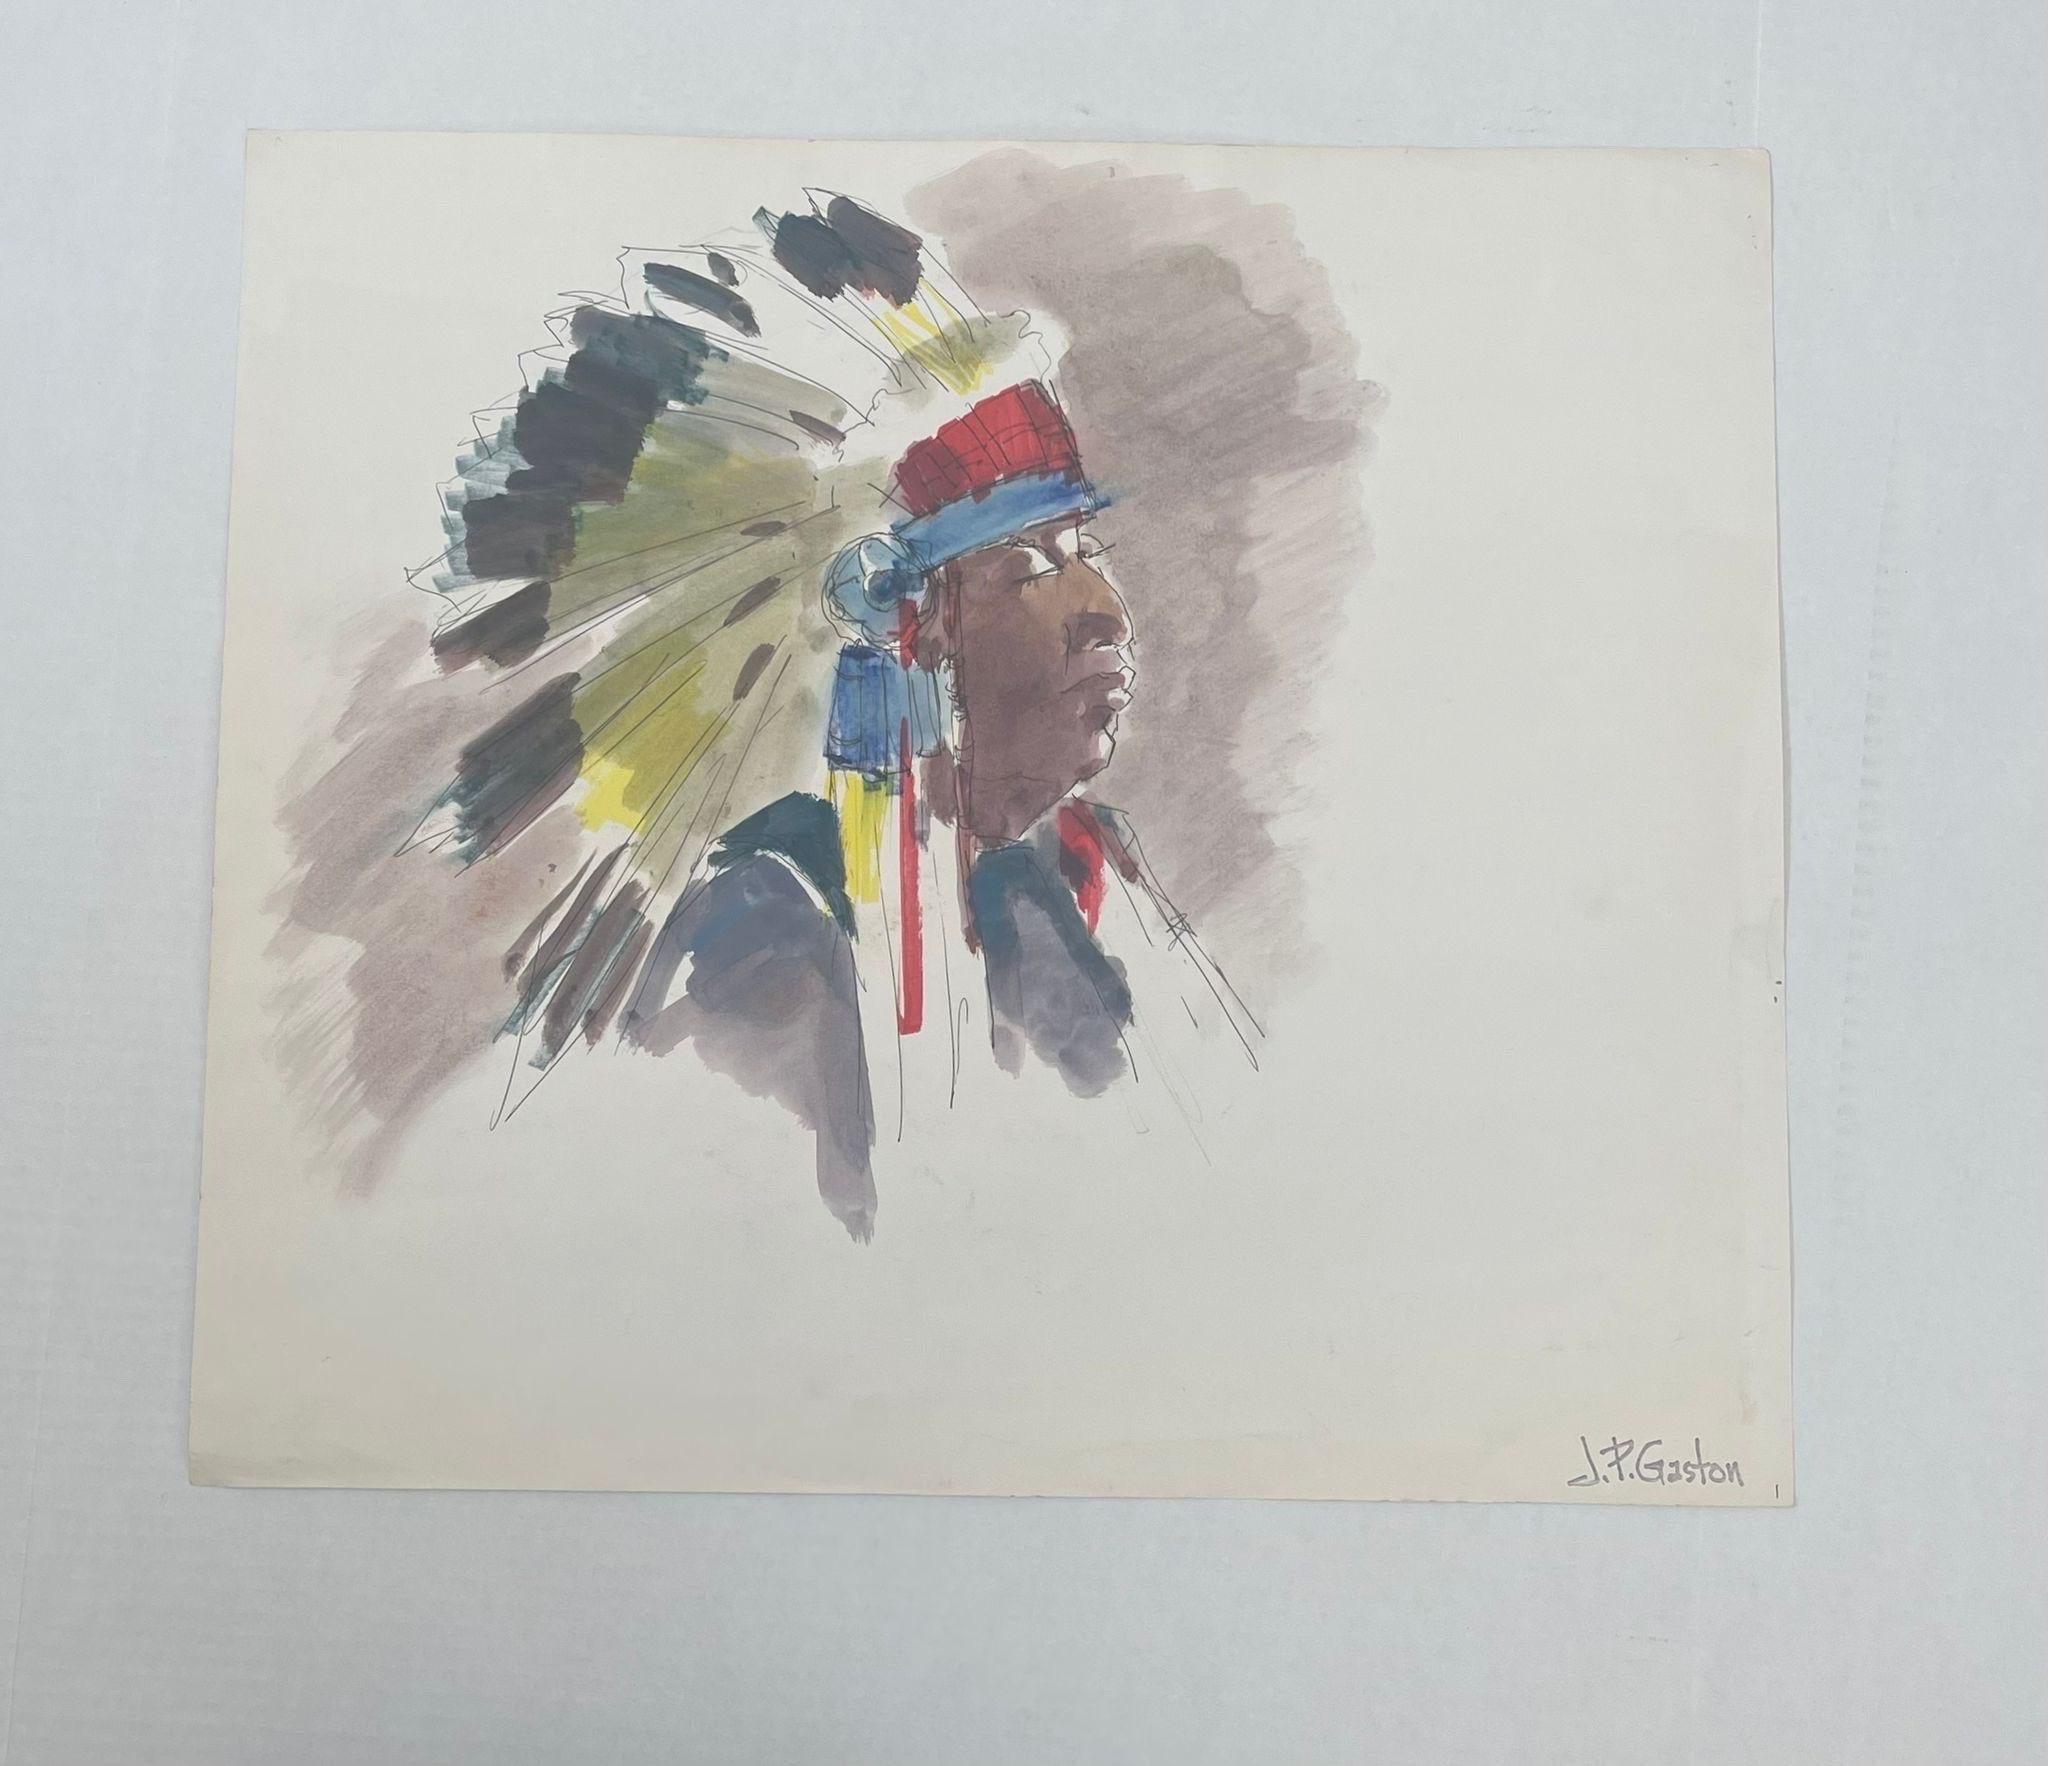 Abstract Portrait of a Native American Man wearing a Traditional Headdress. Possibly Watercolor and Pastel on Paper. Signed JP Gaston as Pictured. Vintage Condition Consistent with Age.

Dimensions. 23 W ; 20 H